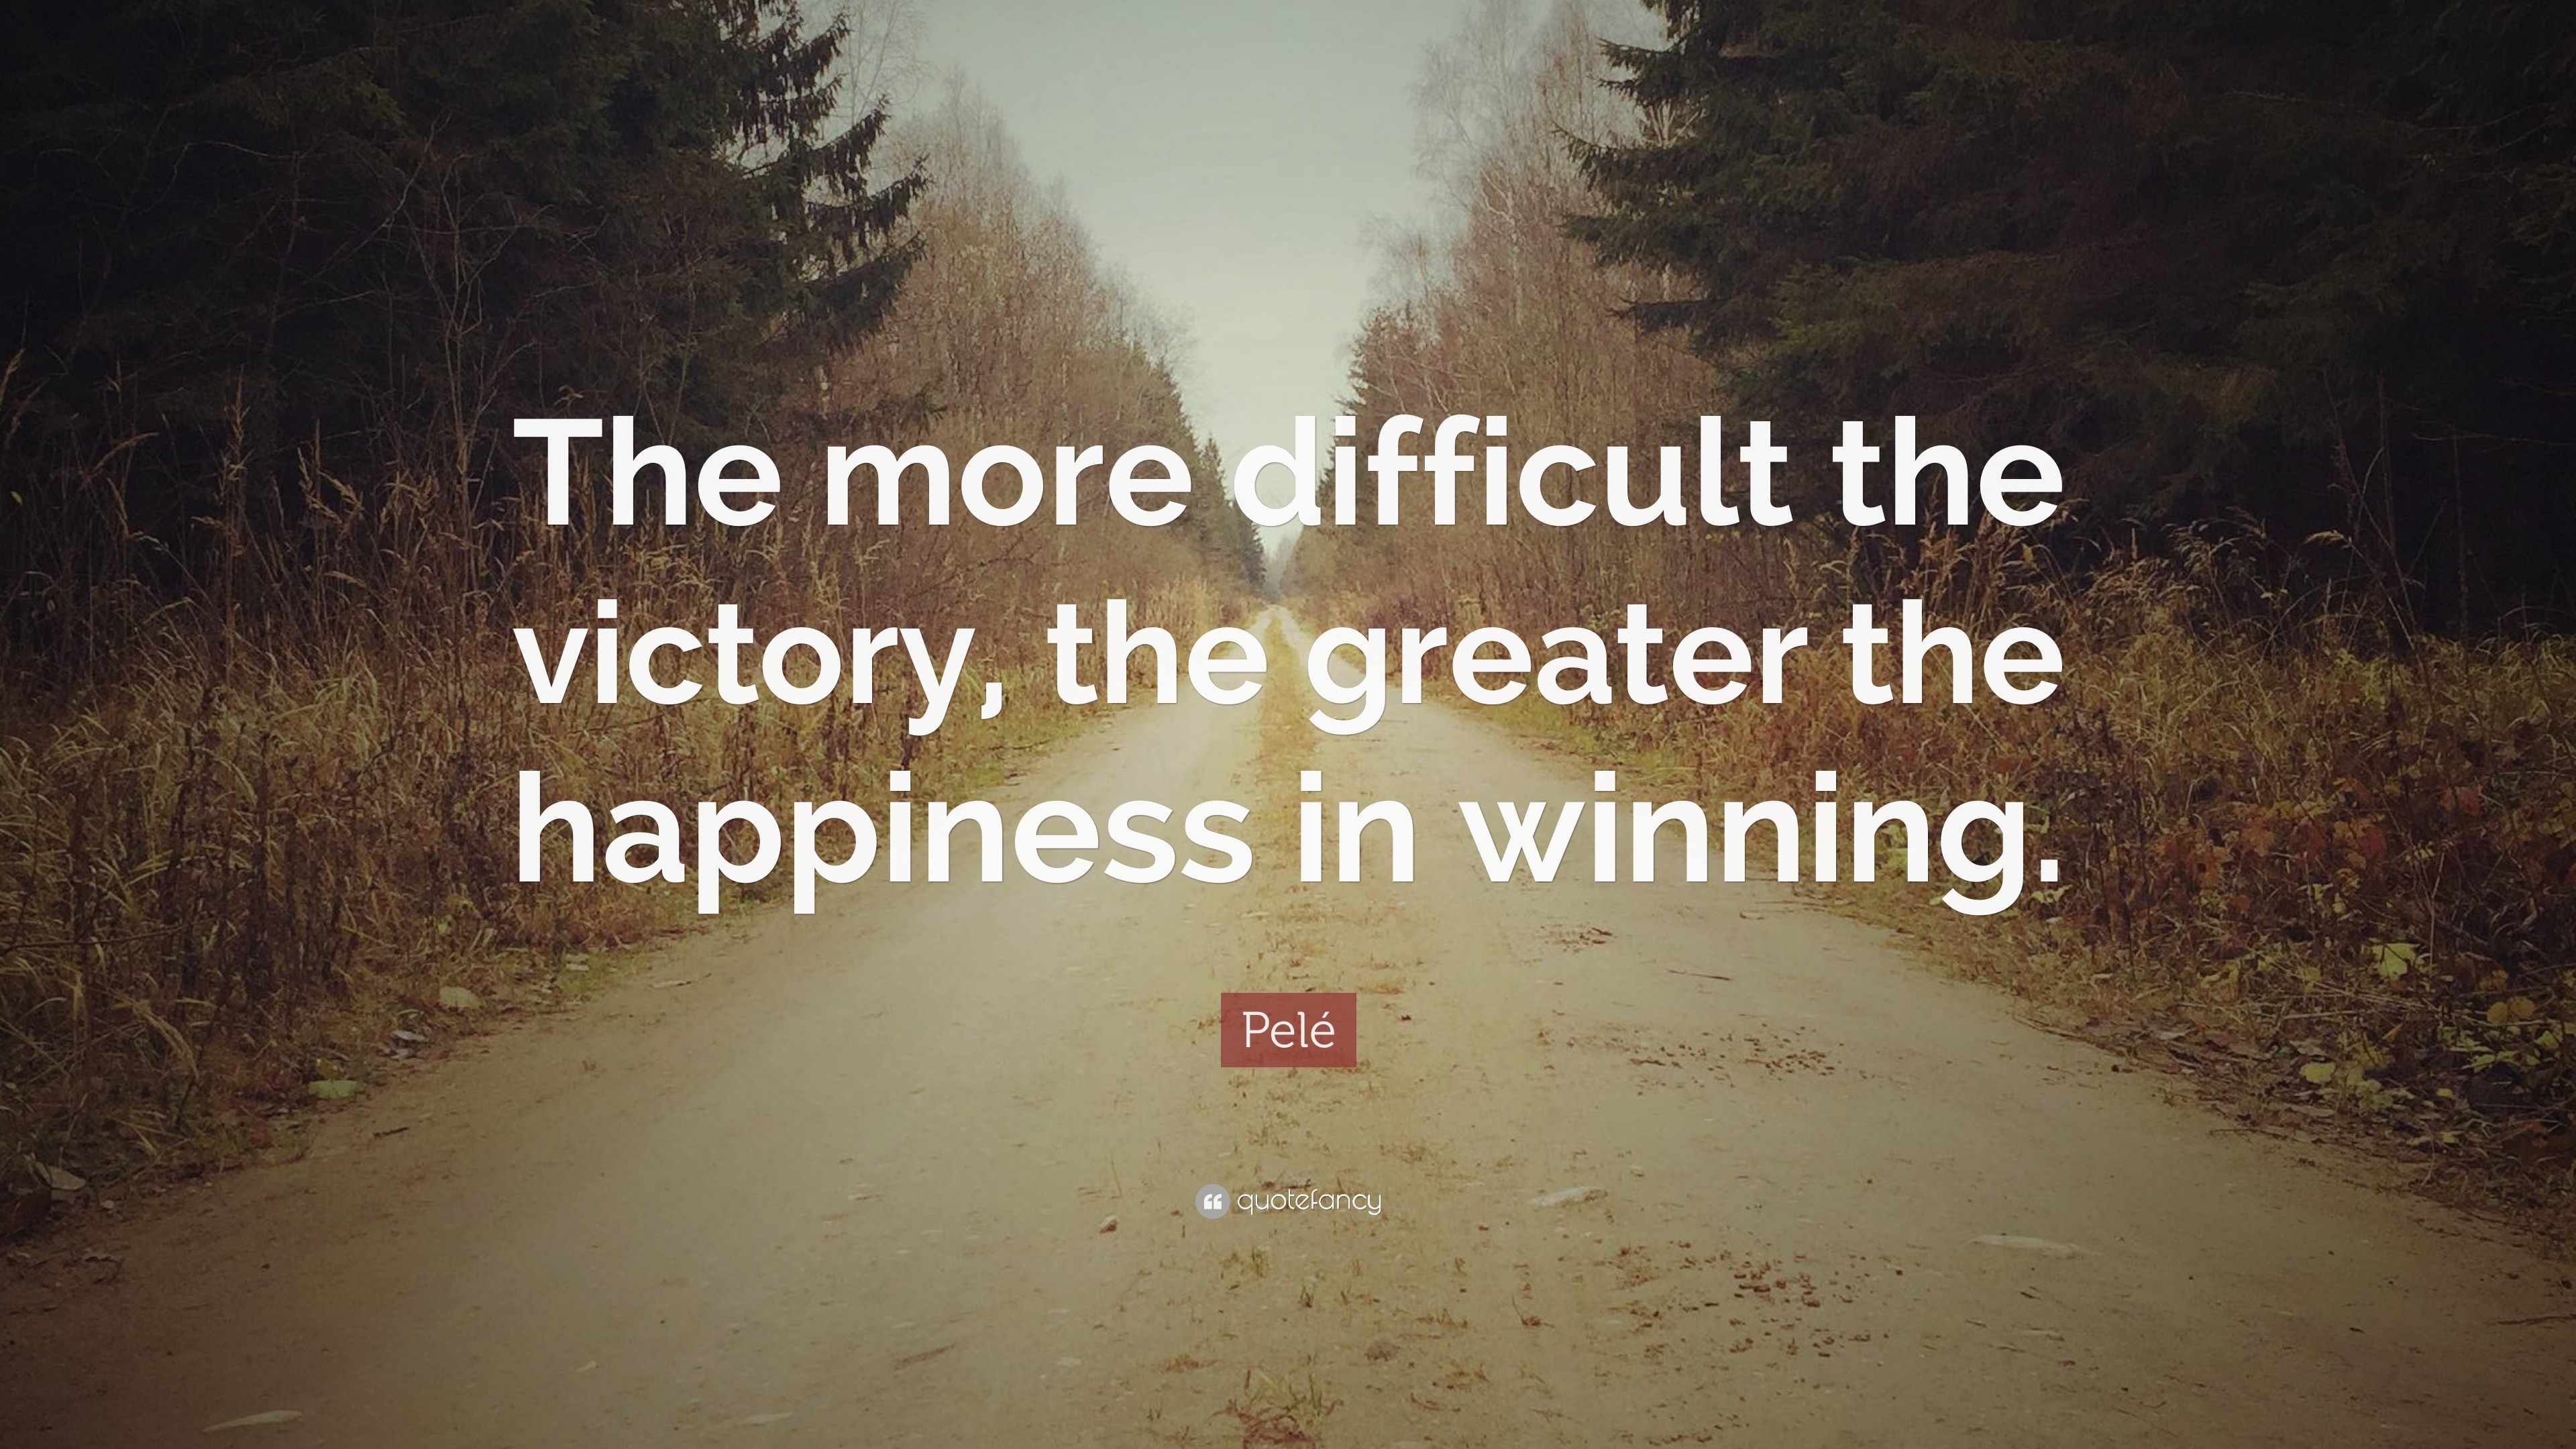 Pelé Quote: “The more difficult the victory, the greater the happiness